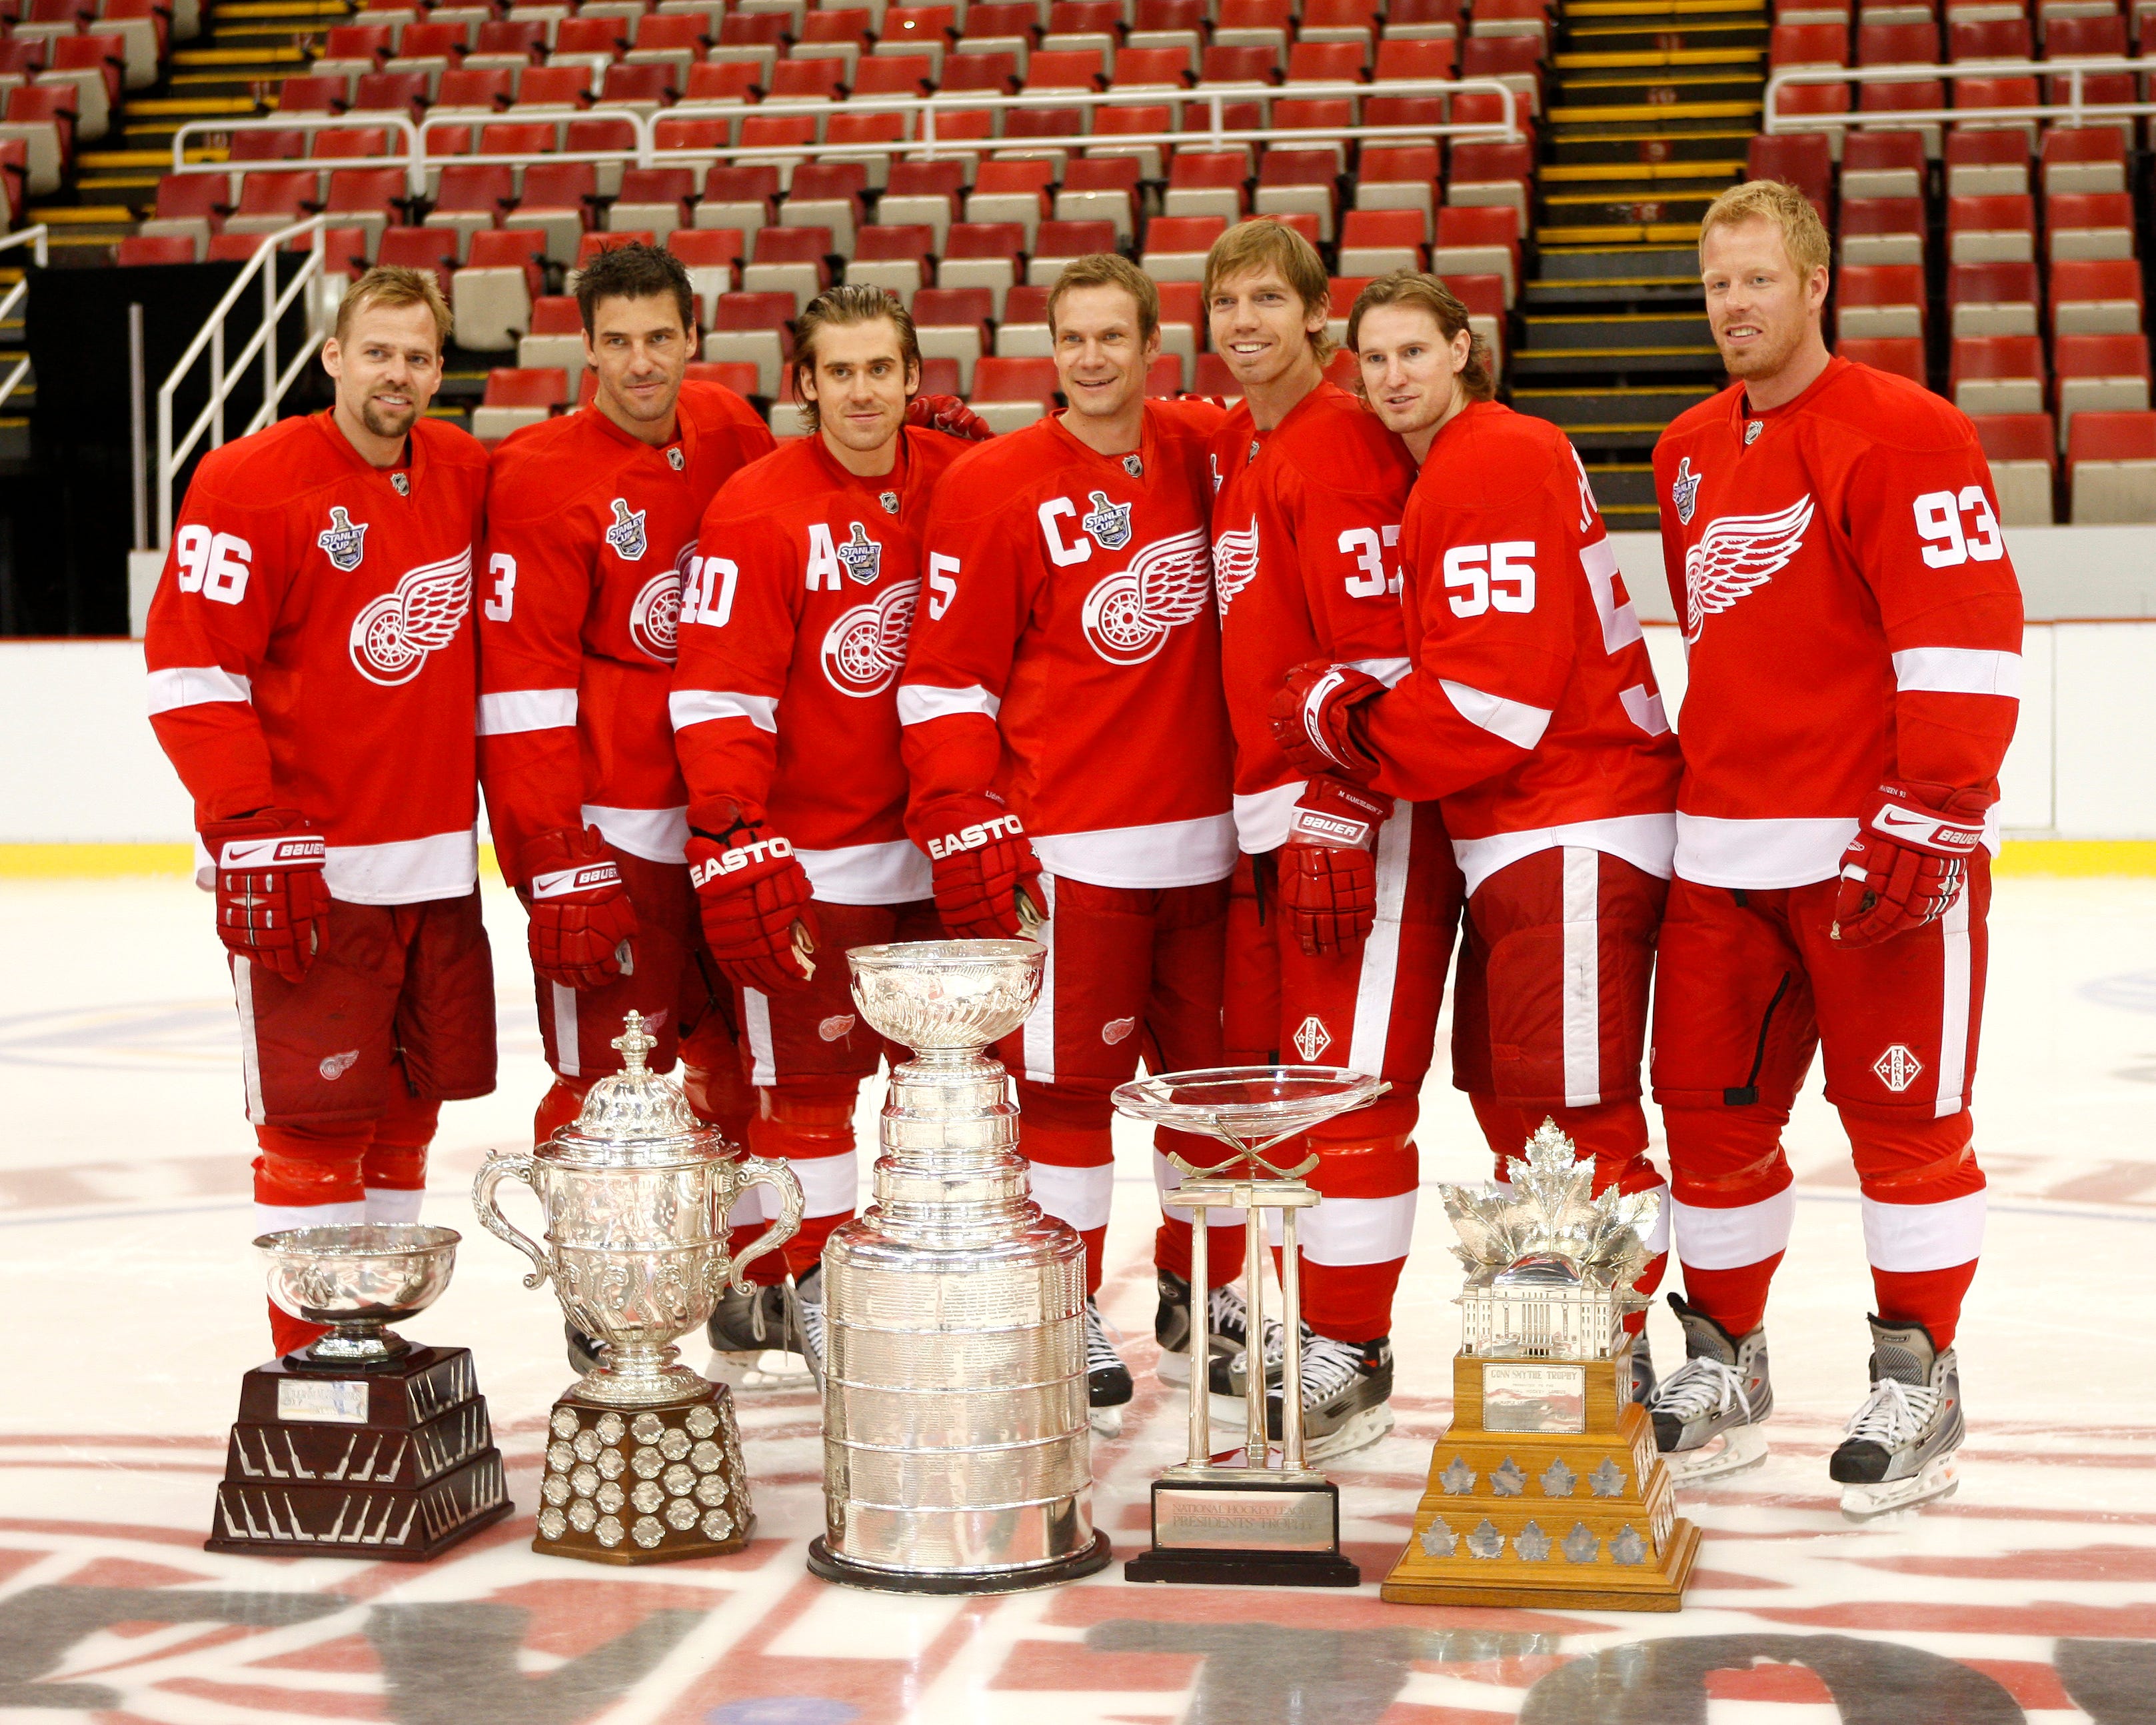 The Red Wings ' Swedish contingent pose with the various trophies won throughout the 2007-08 season. From left are Tomas Holmstrom, Andreas Lilja, Henrik Zetterberg, Nicklas Lidstrom, Mikael Samuelsson, Niklas Kronwall, and Johan Franzen. Photos are of the team ' s last day at Joe Louis Arena on June 7, 2008.